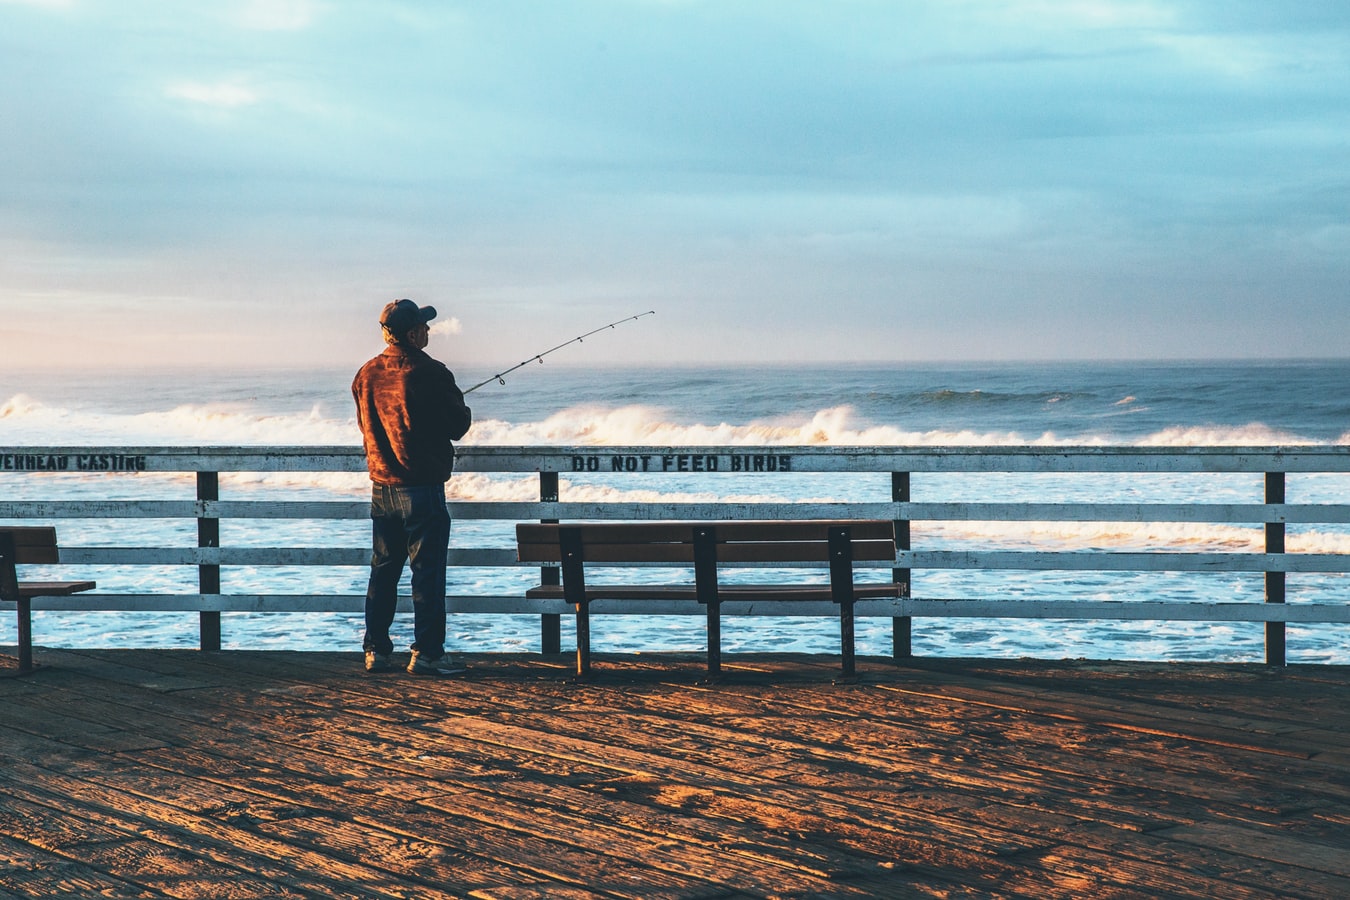 Man standing alone on a pier fishing